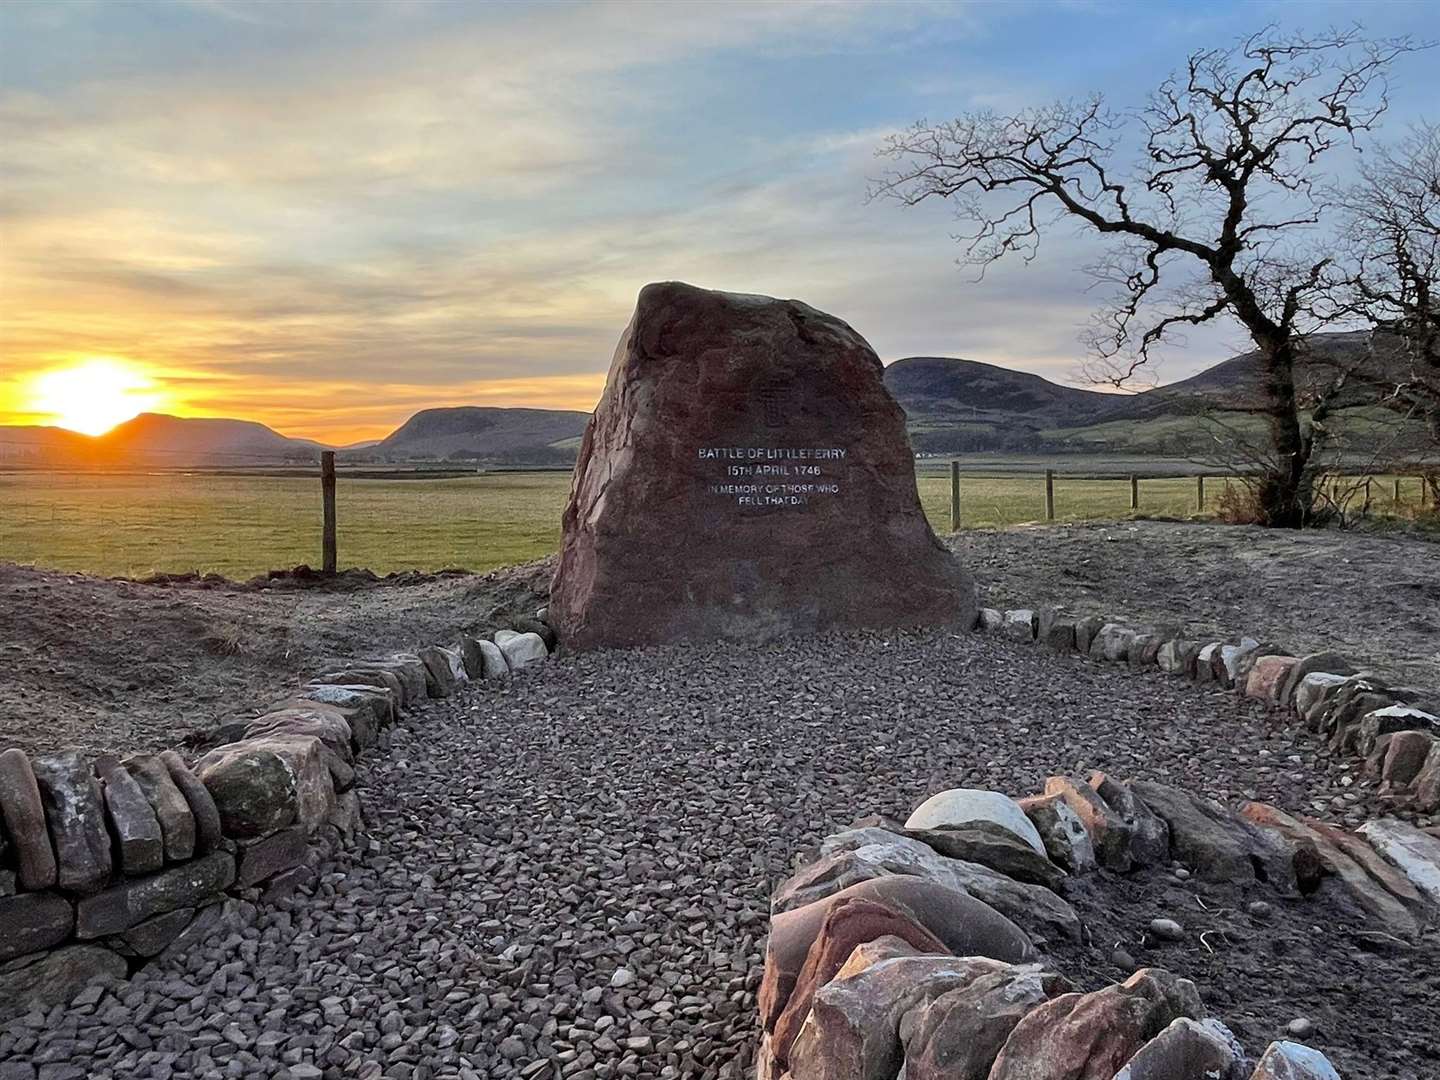 The battle memorial stone will be officially unveiled on April 15.